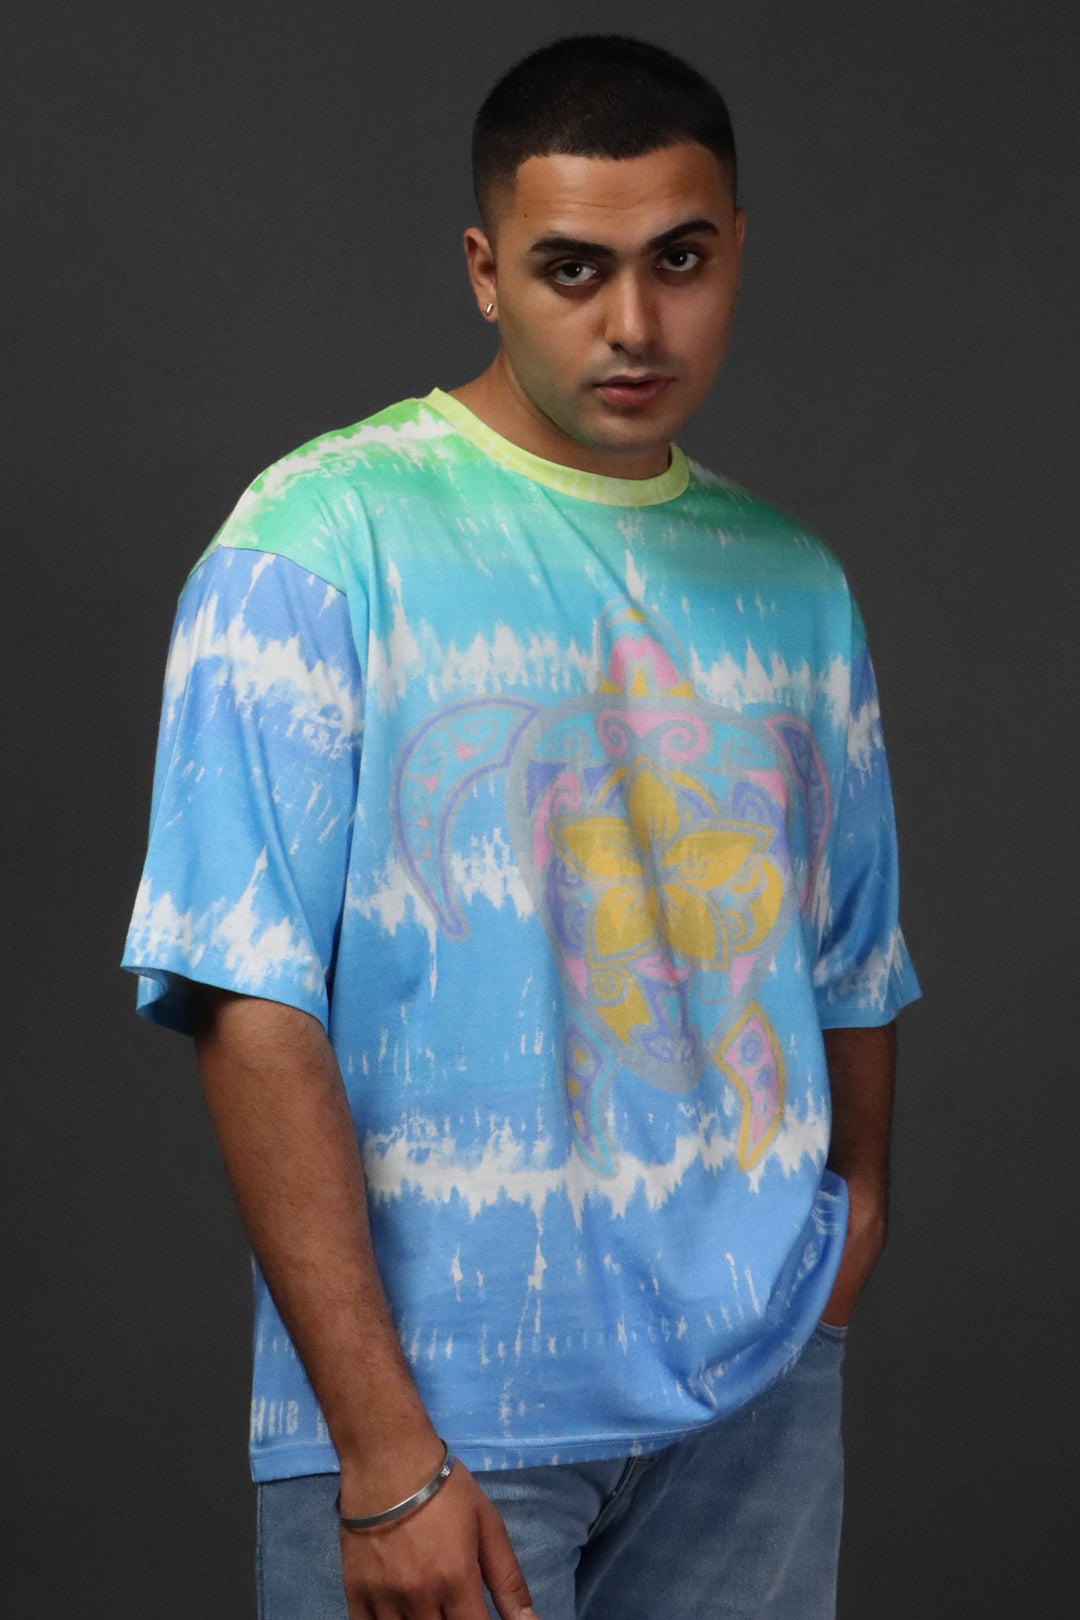 Printed Oversized Tee - MEN'S COTTON PRINTED OVER SIZE TEE#45